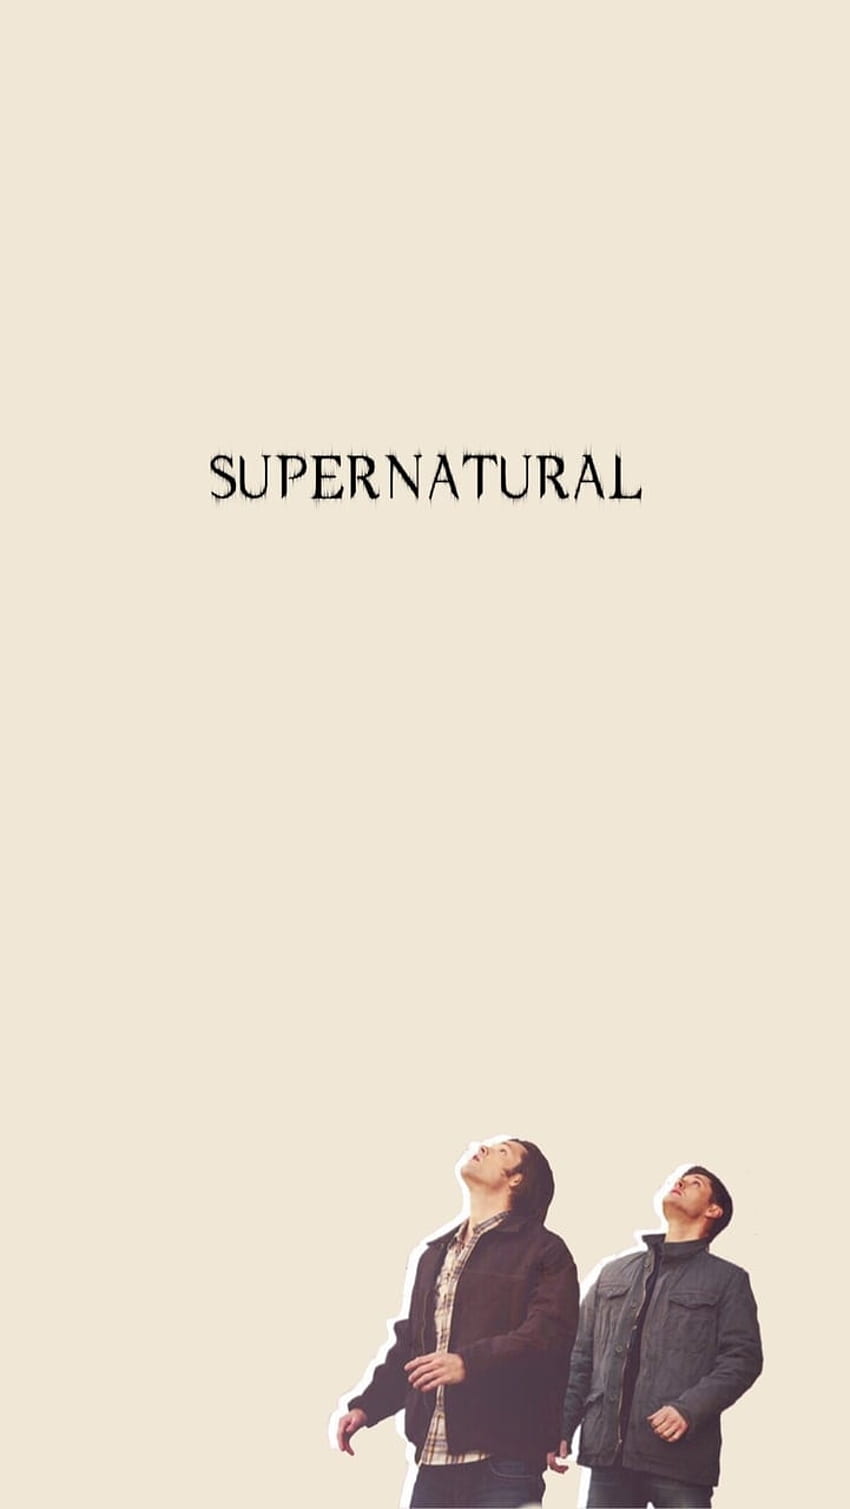 50 Supernatural Phone Wallpapers  Mobile Abyss